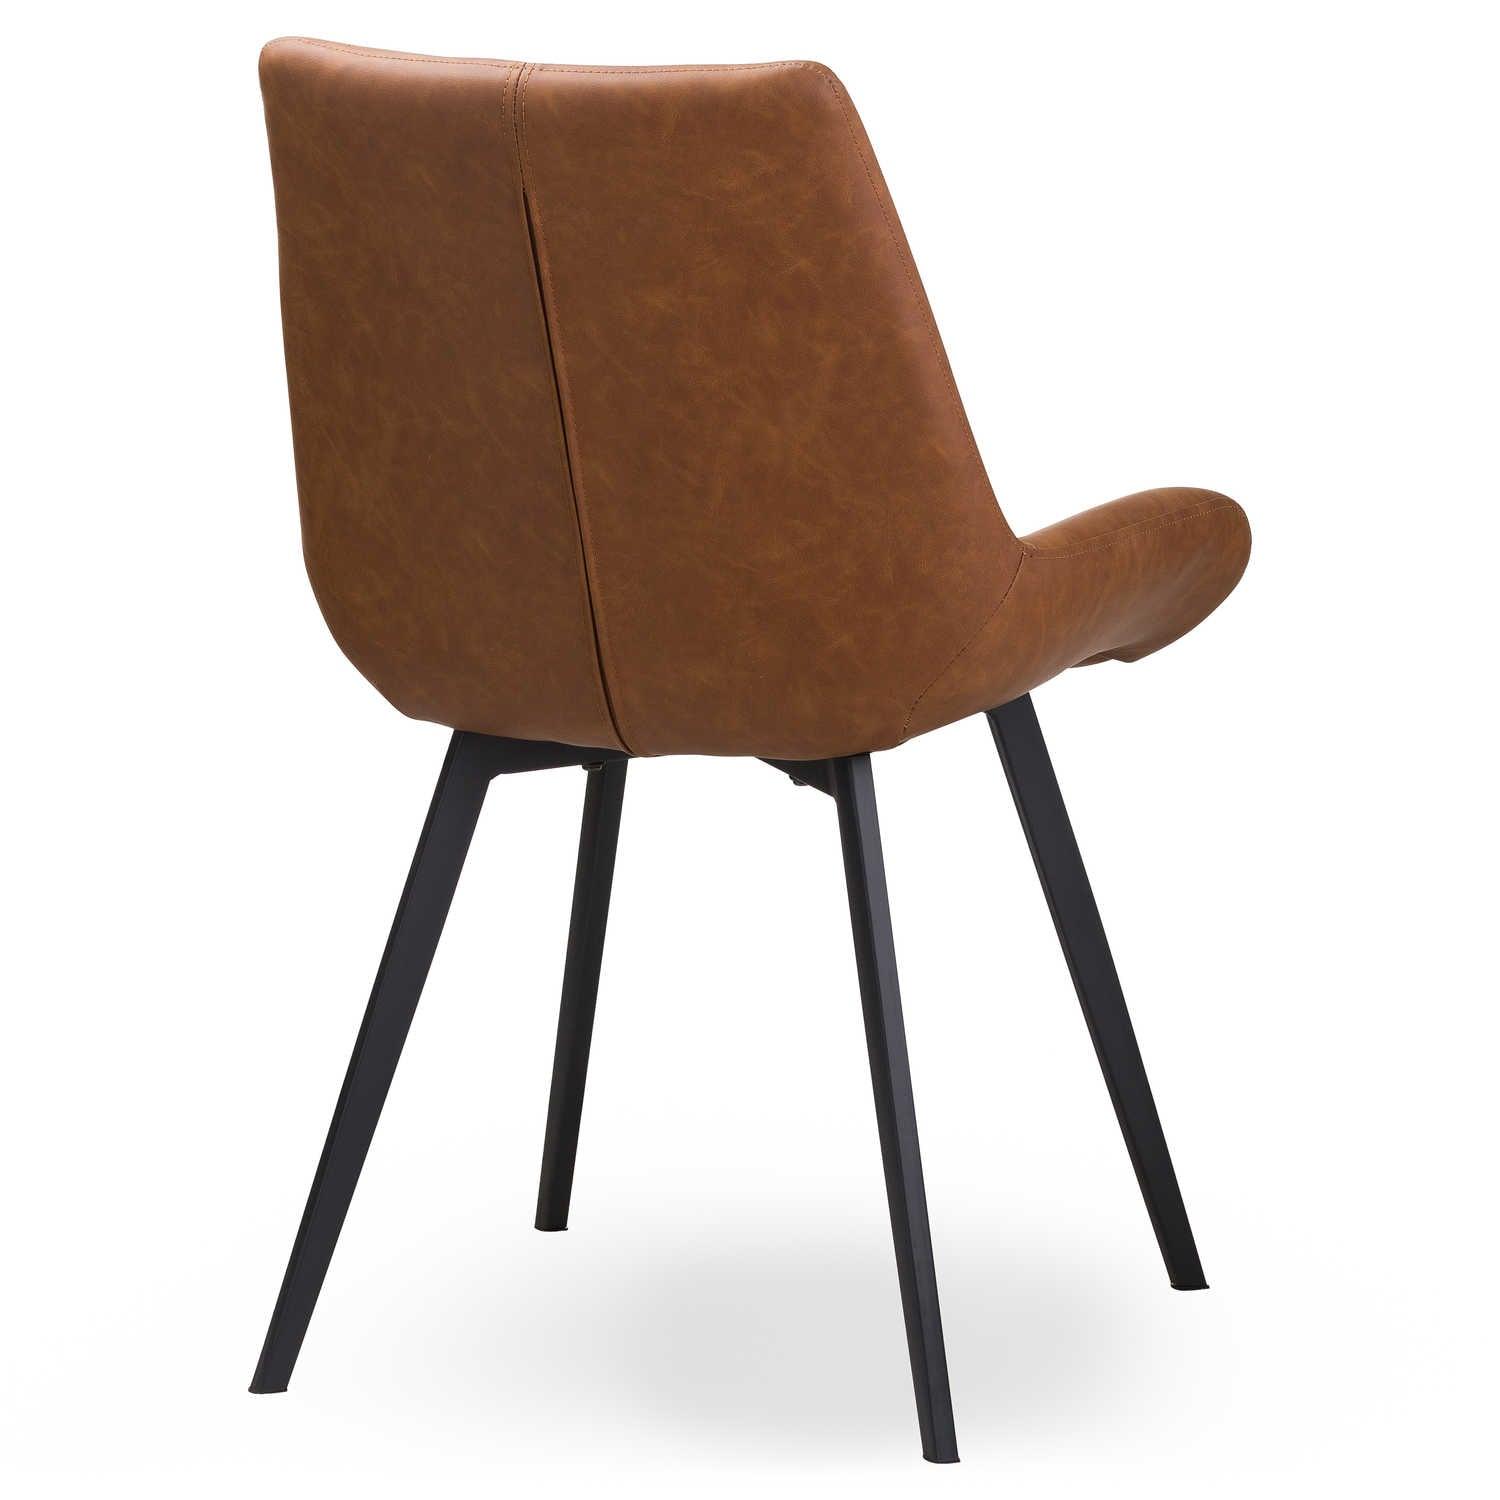 Malmo Tan Dining Chair - Vookoo Lifestyle